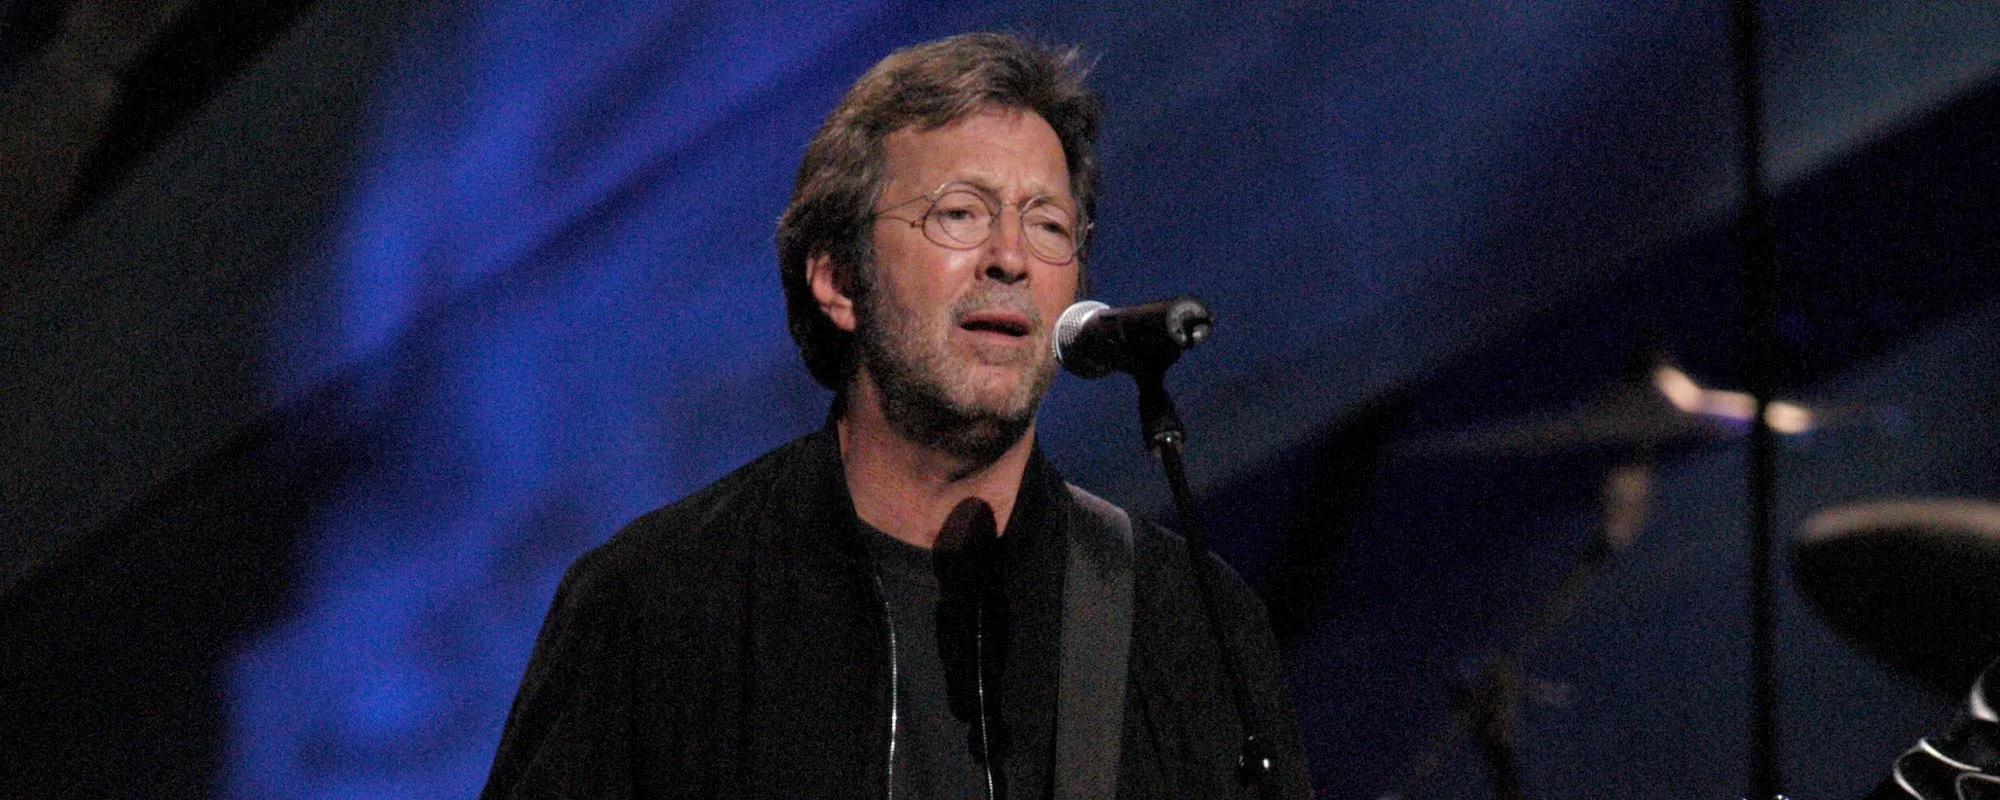 The Story Behind One of the Hardest Songs for Eric Clapton to Record, “My Father’s Eyes” [Video]